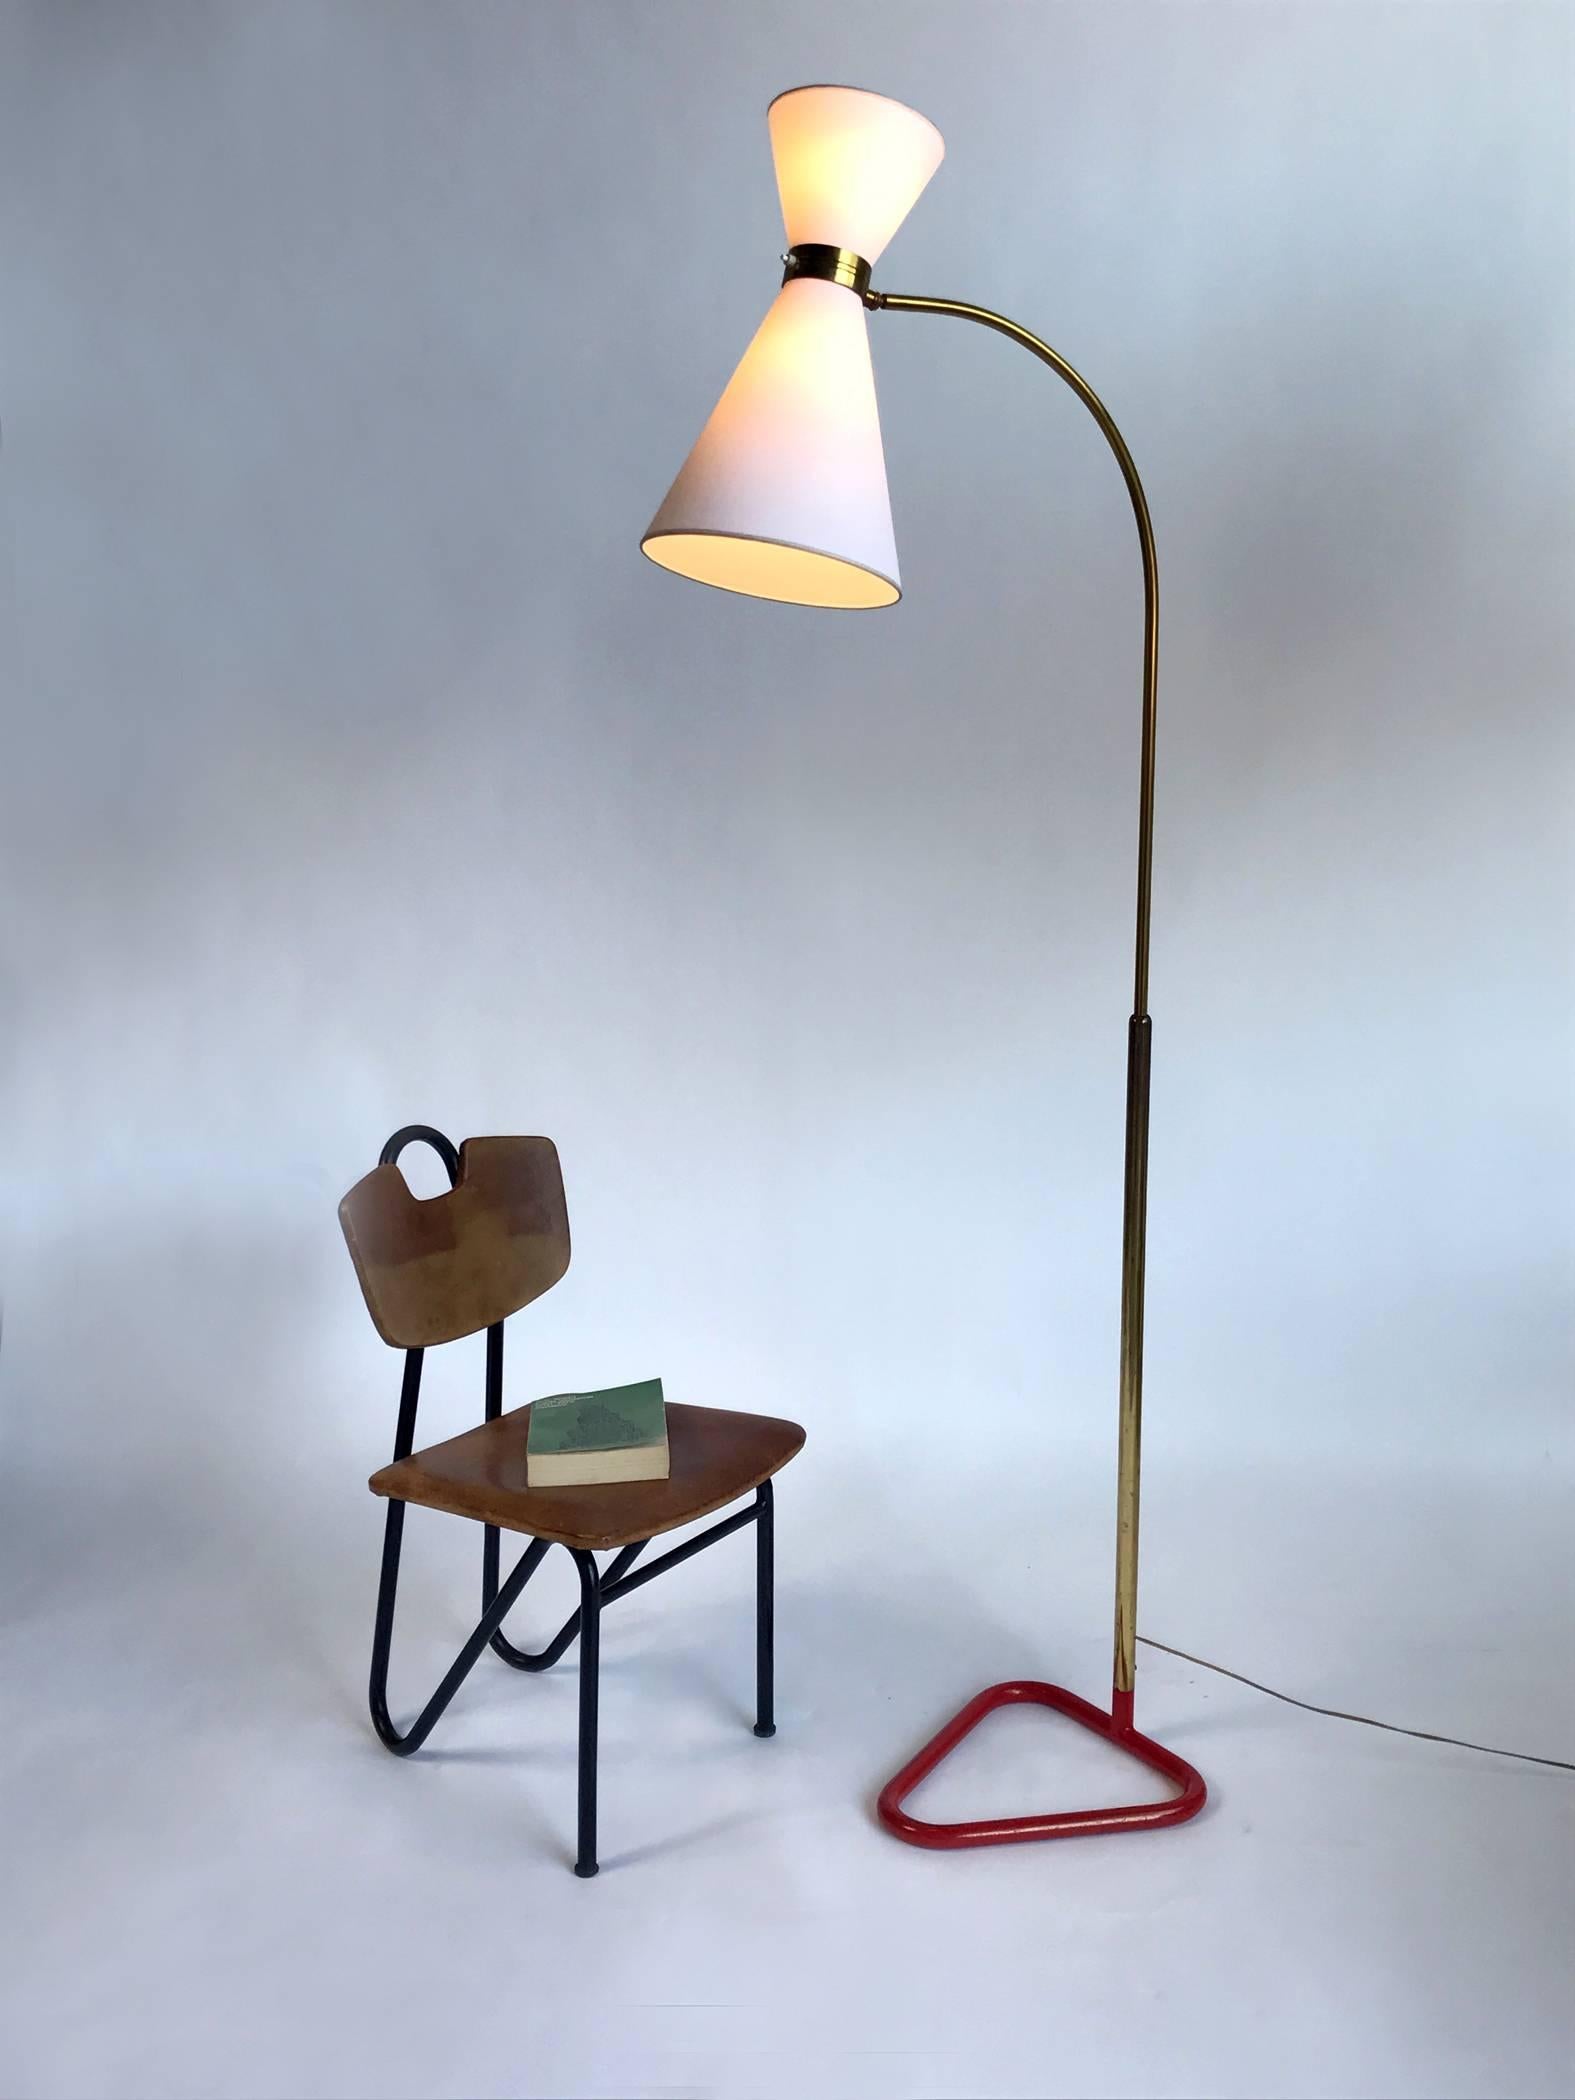 Lacquered Large Floor Lamp with Triangular Base, Maison Lunel, France, 1950